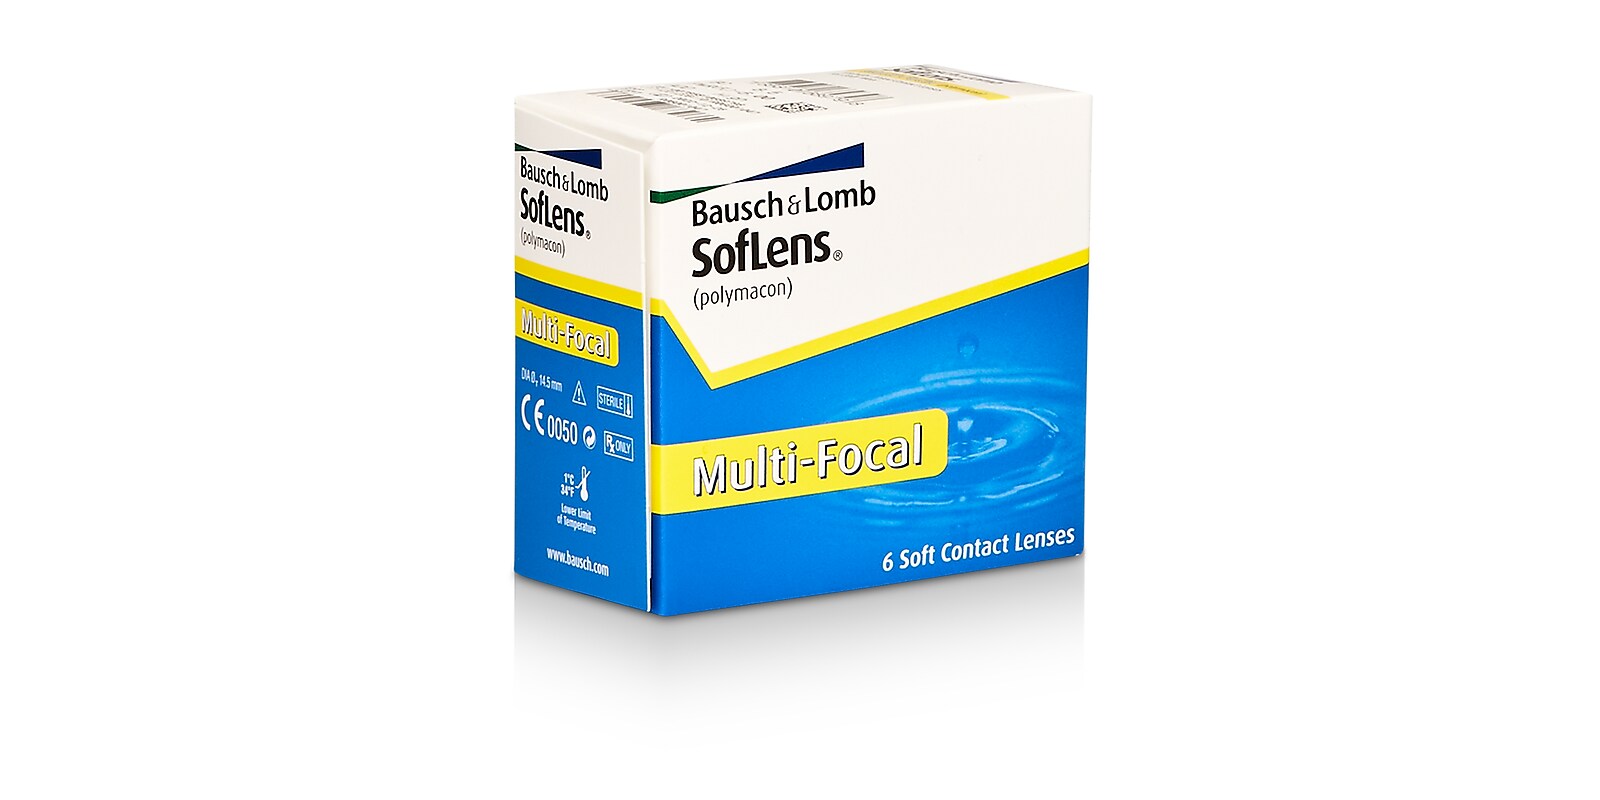 SofLens Multi-Focal, 6 pack contact lenses